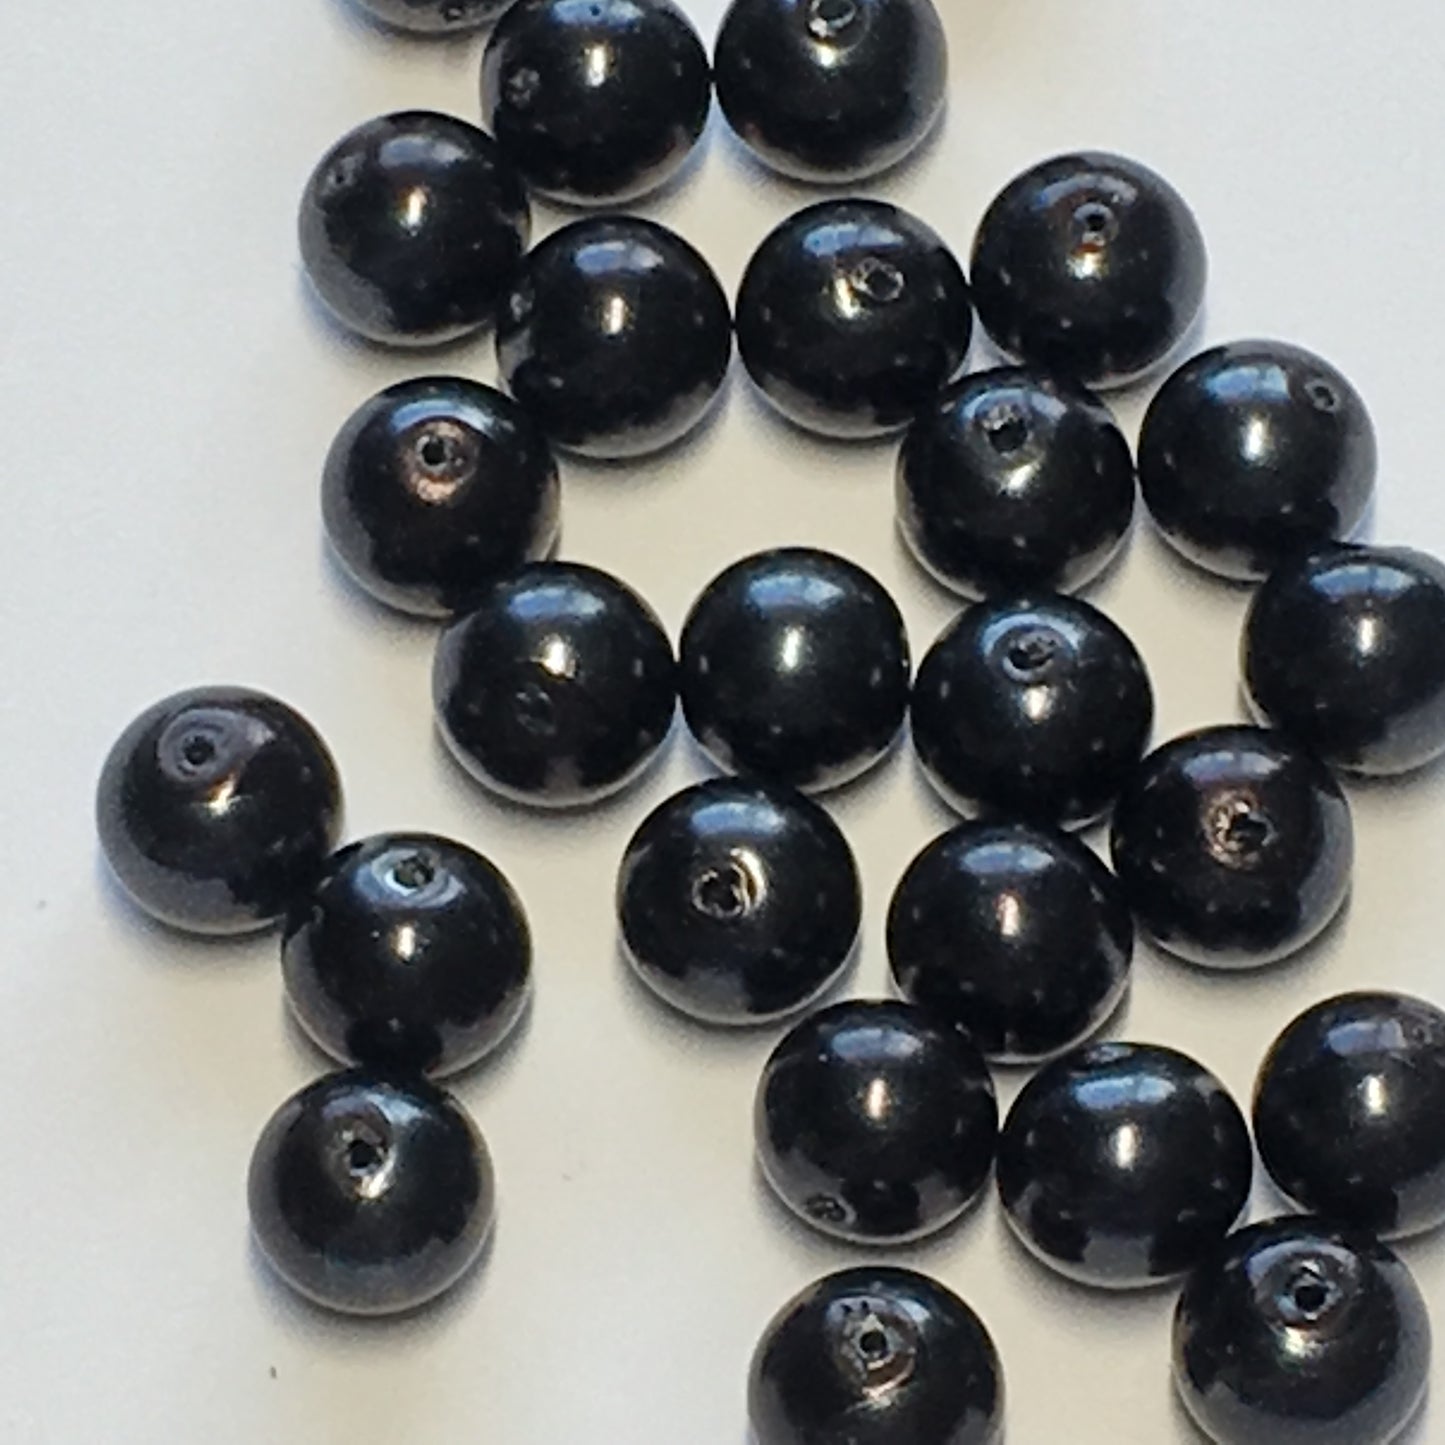 Black Glass Pearl Round Beads, 6 mm - 22 Beads